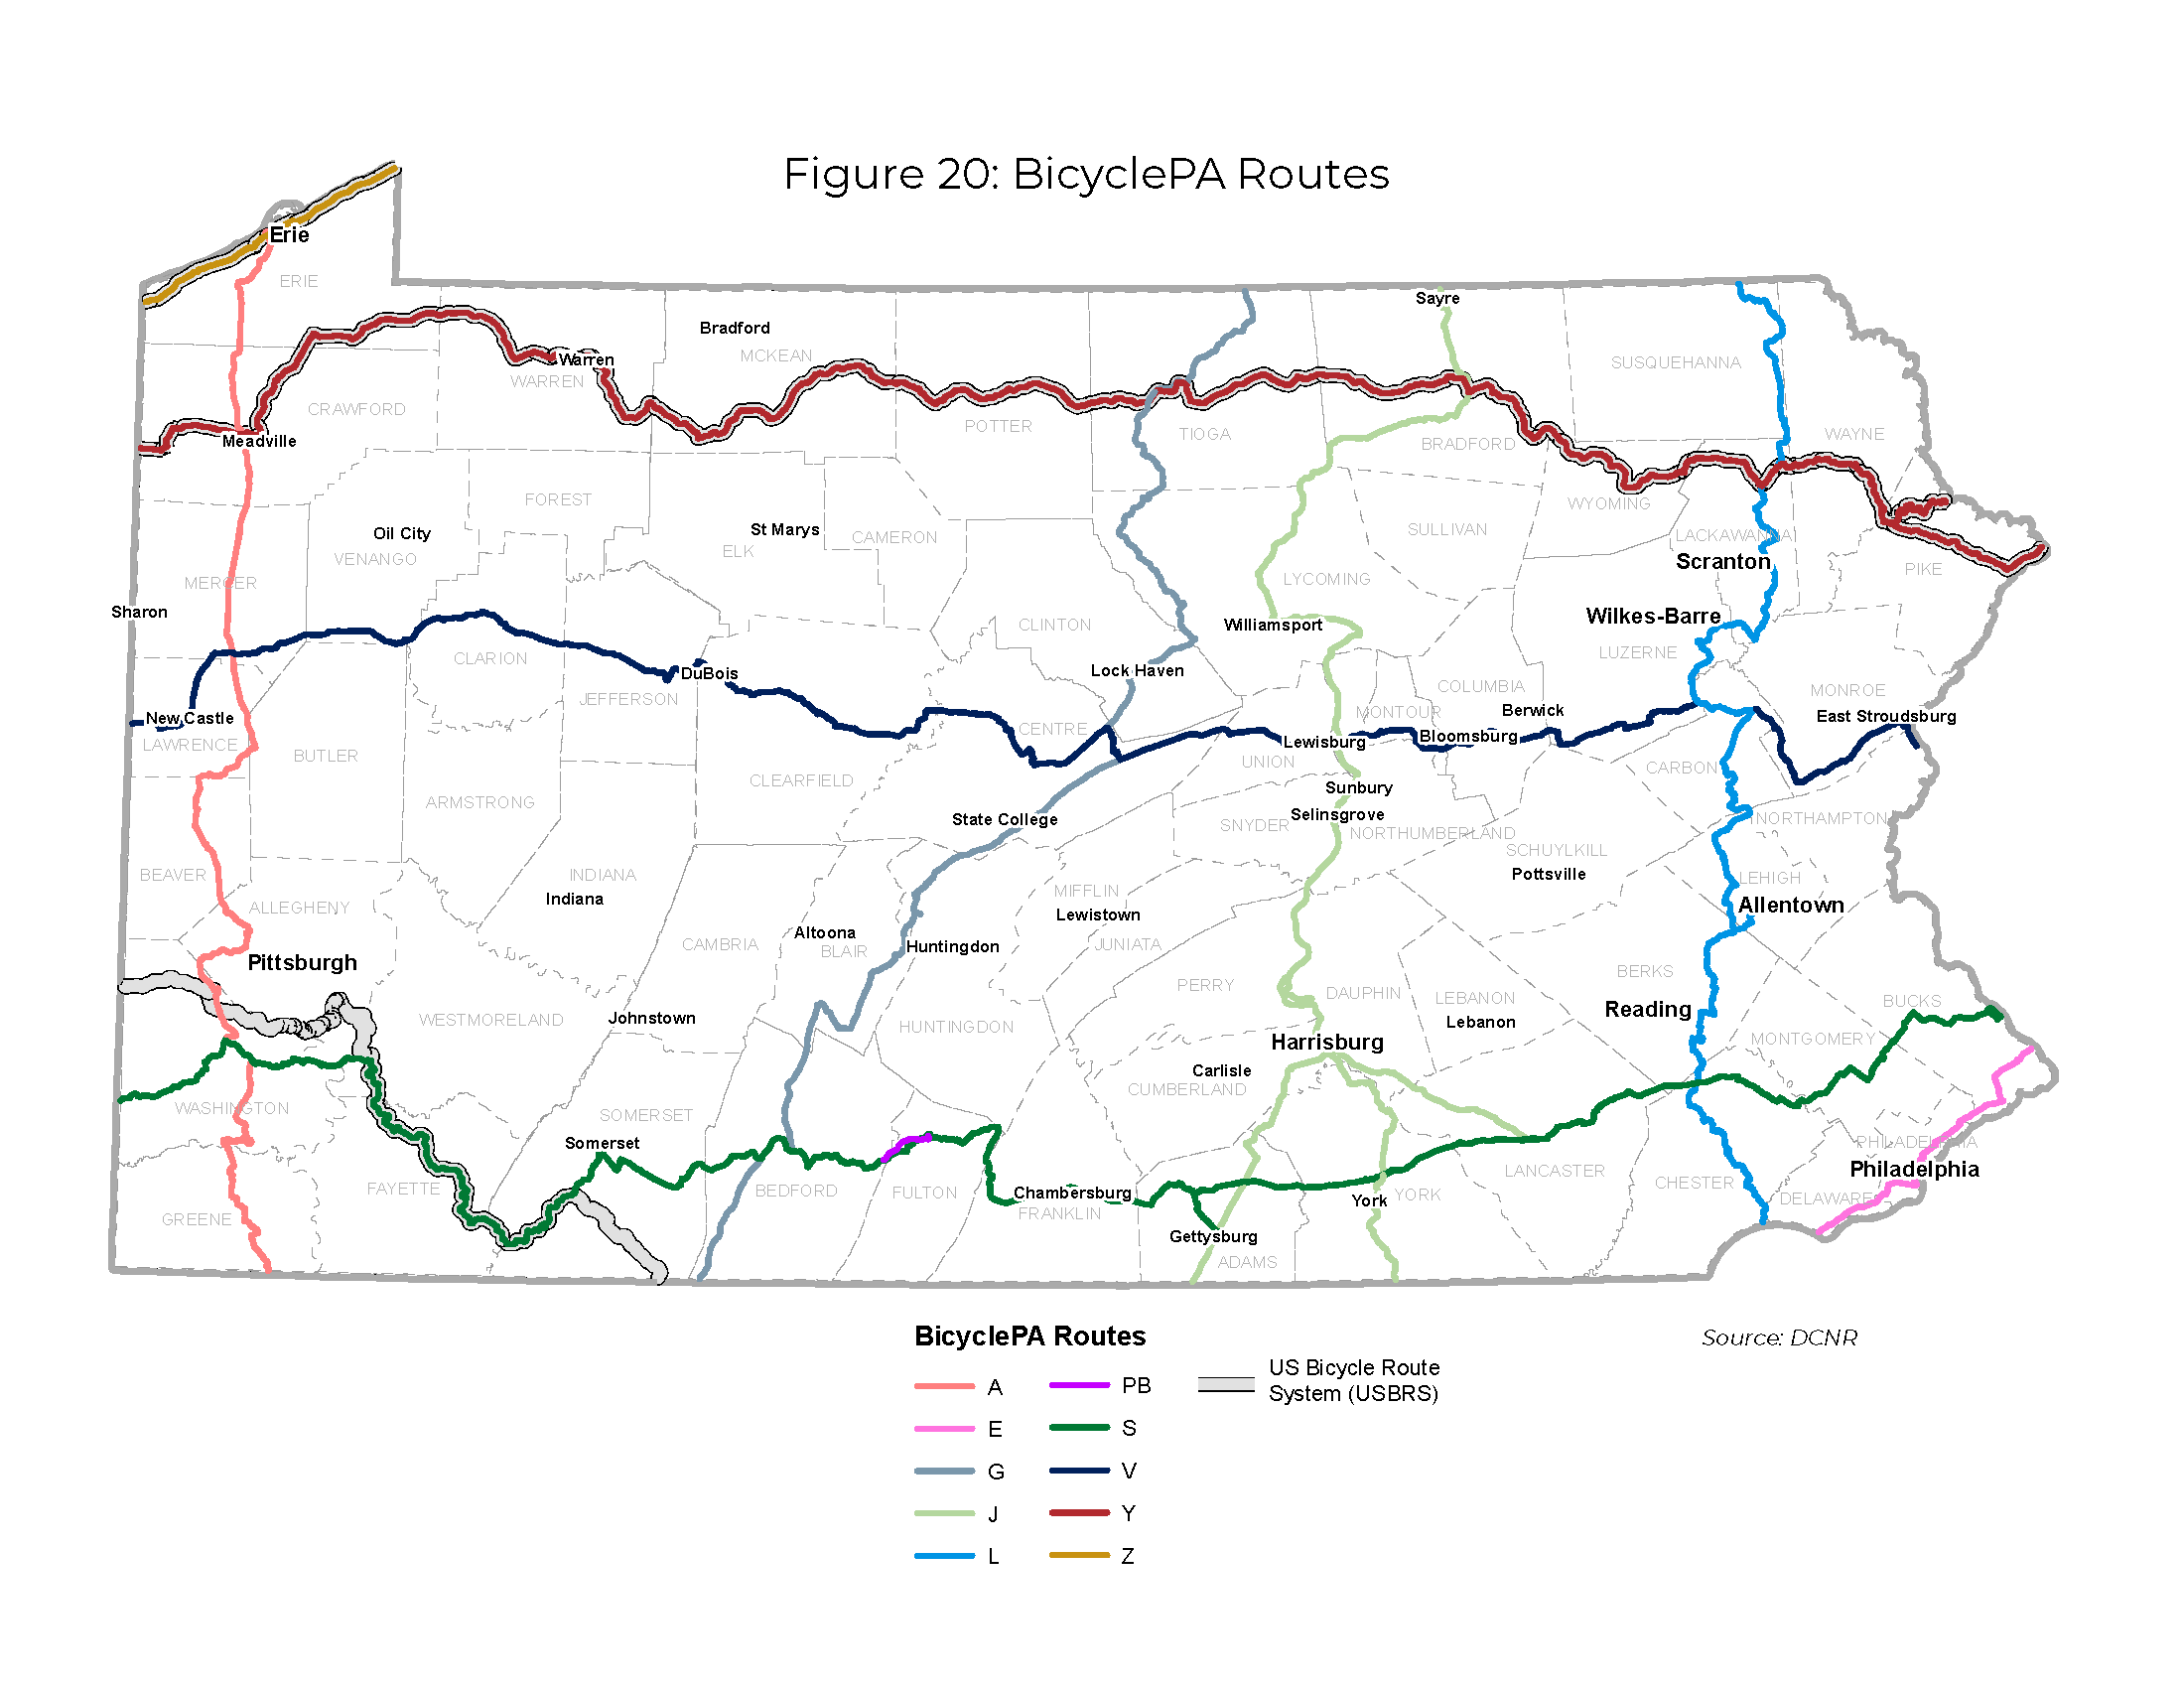 Map of Pennsylvania depicting the BicyclePA Routes of A, E, G, J, L, PB, S, V, Y, Z and the US Bicycle Route System.